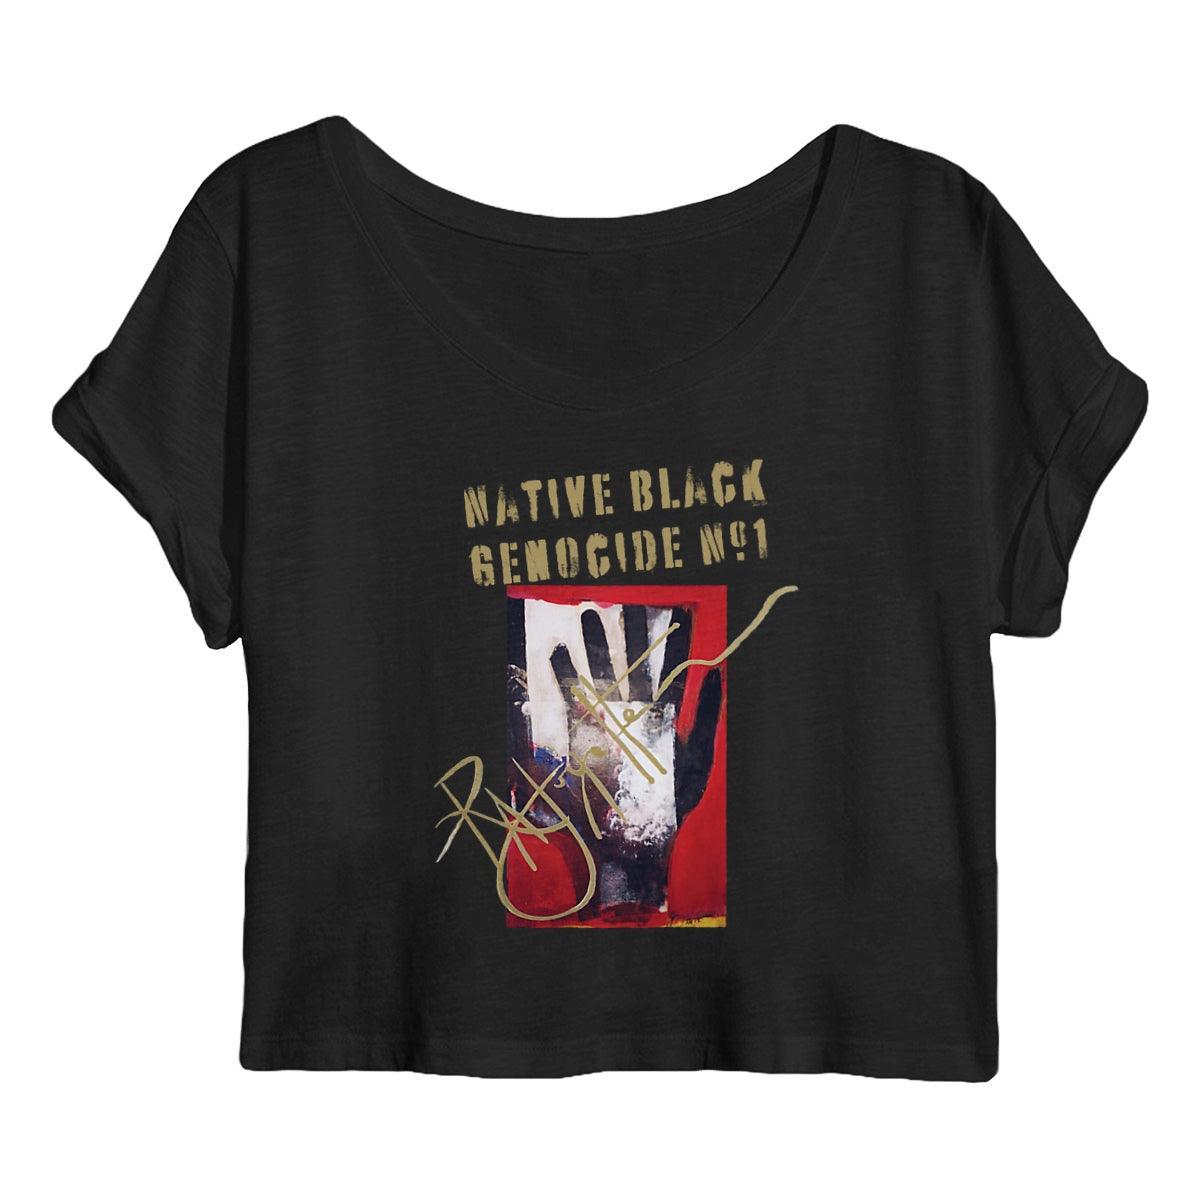 Native Black Genocide #1 Premium Women's Crop Top, made from 100% organic cotton, designed by Tree of Life Art, eco-conscious and stylish.